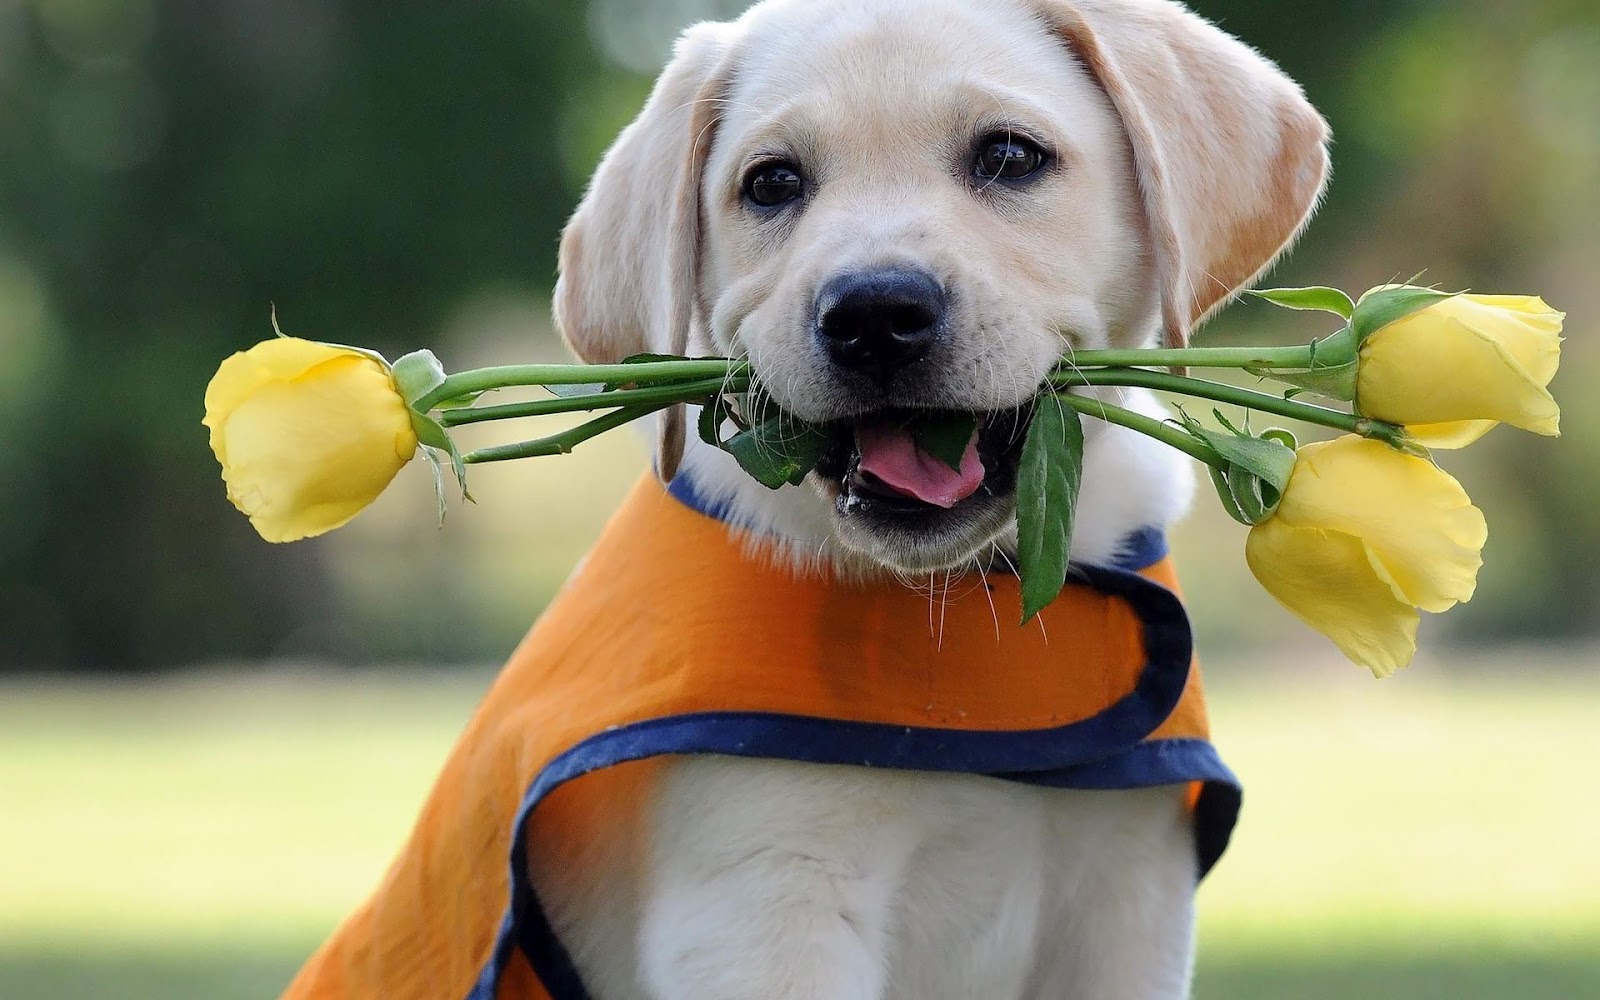 hd dog wallpaper with a dog with yellow roses in his mouth hd dogs